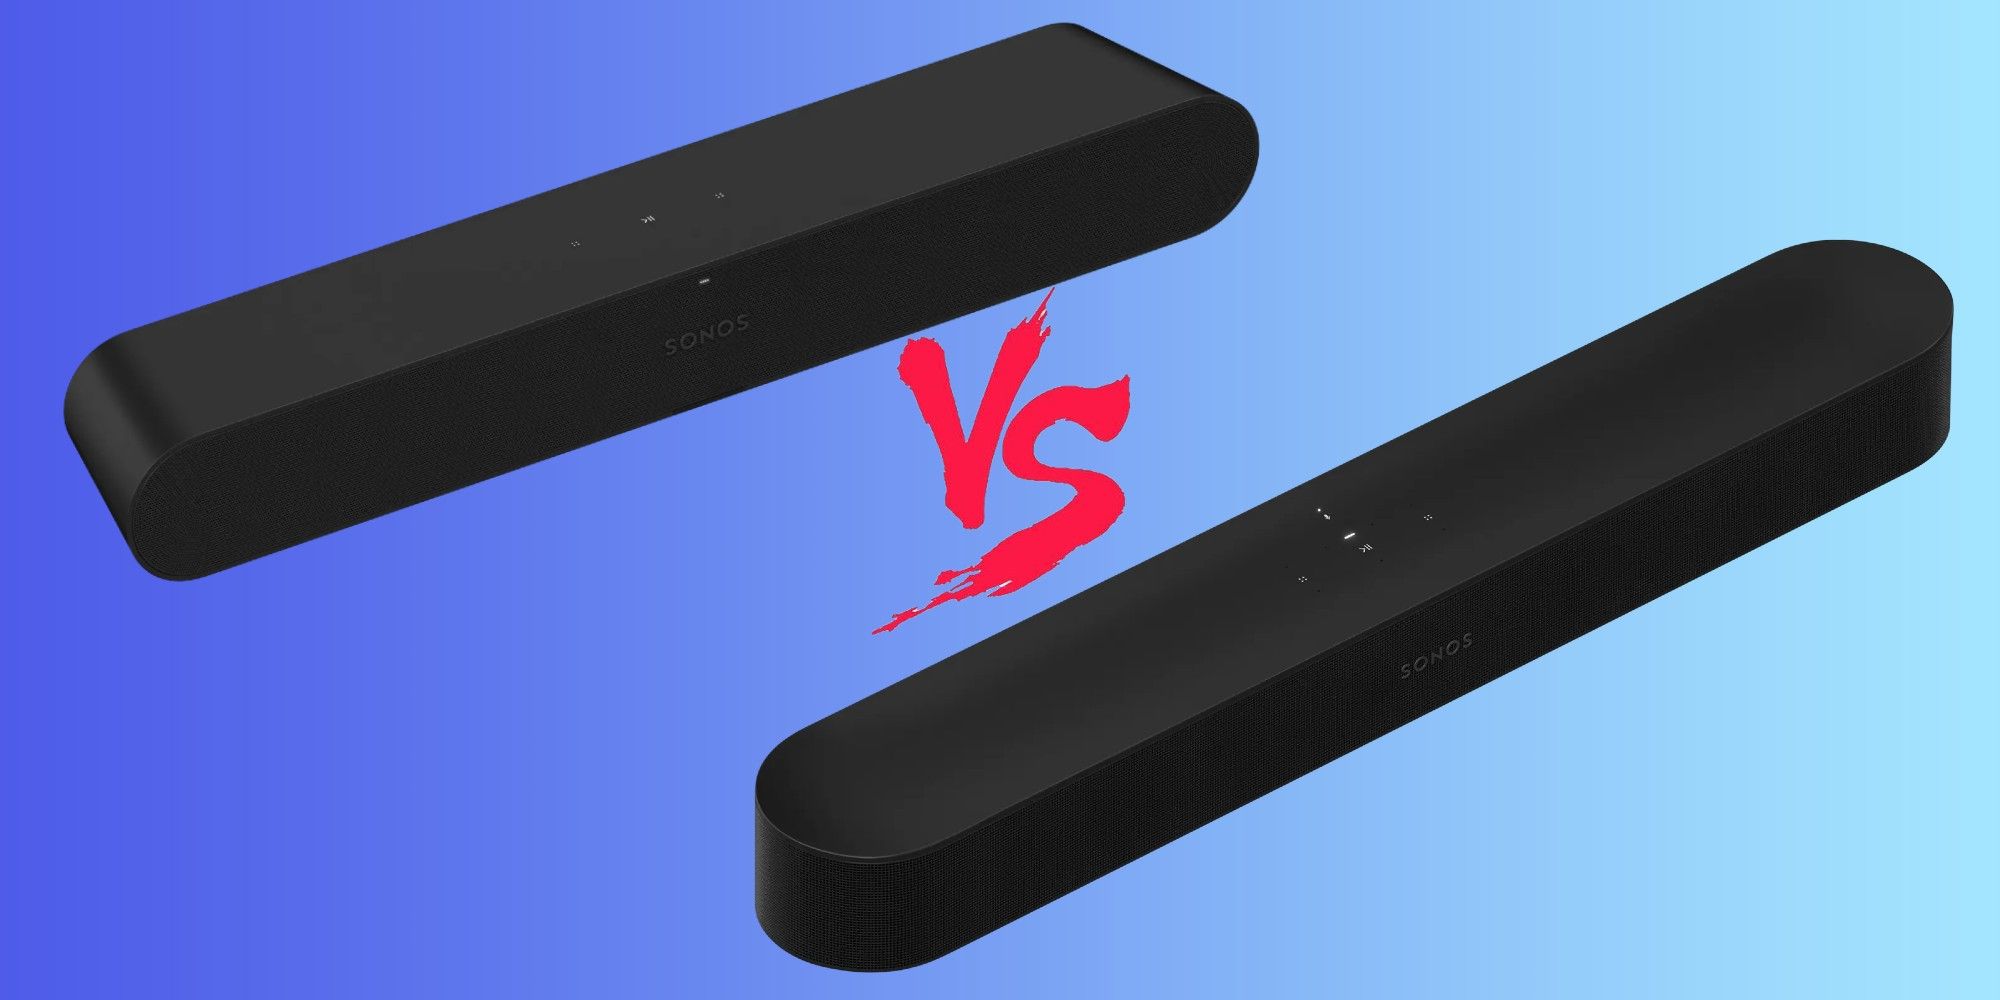 Sonos Ray Vs Sonos Beam (Gen 2): Which Is The Better Buy?